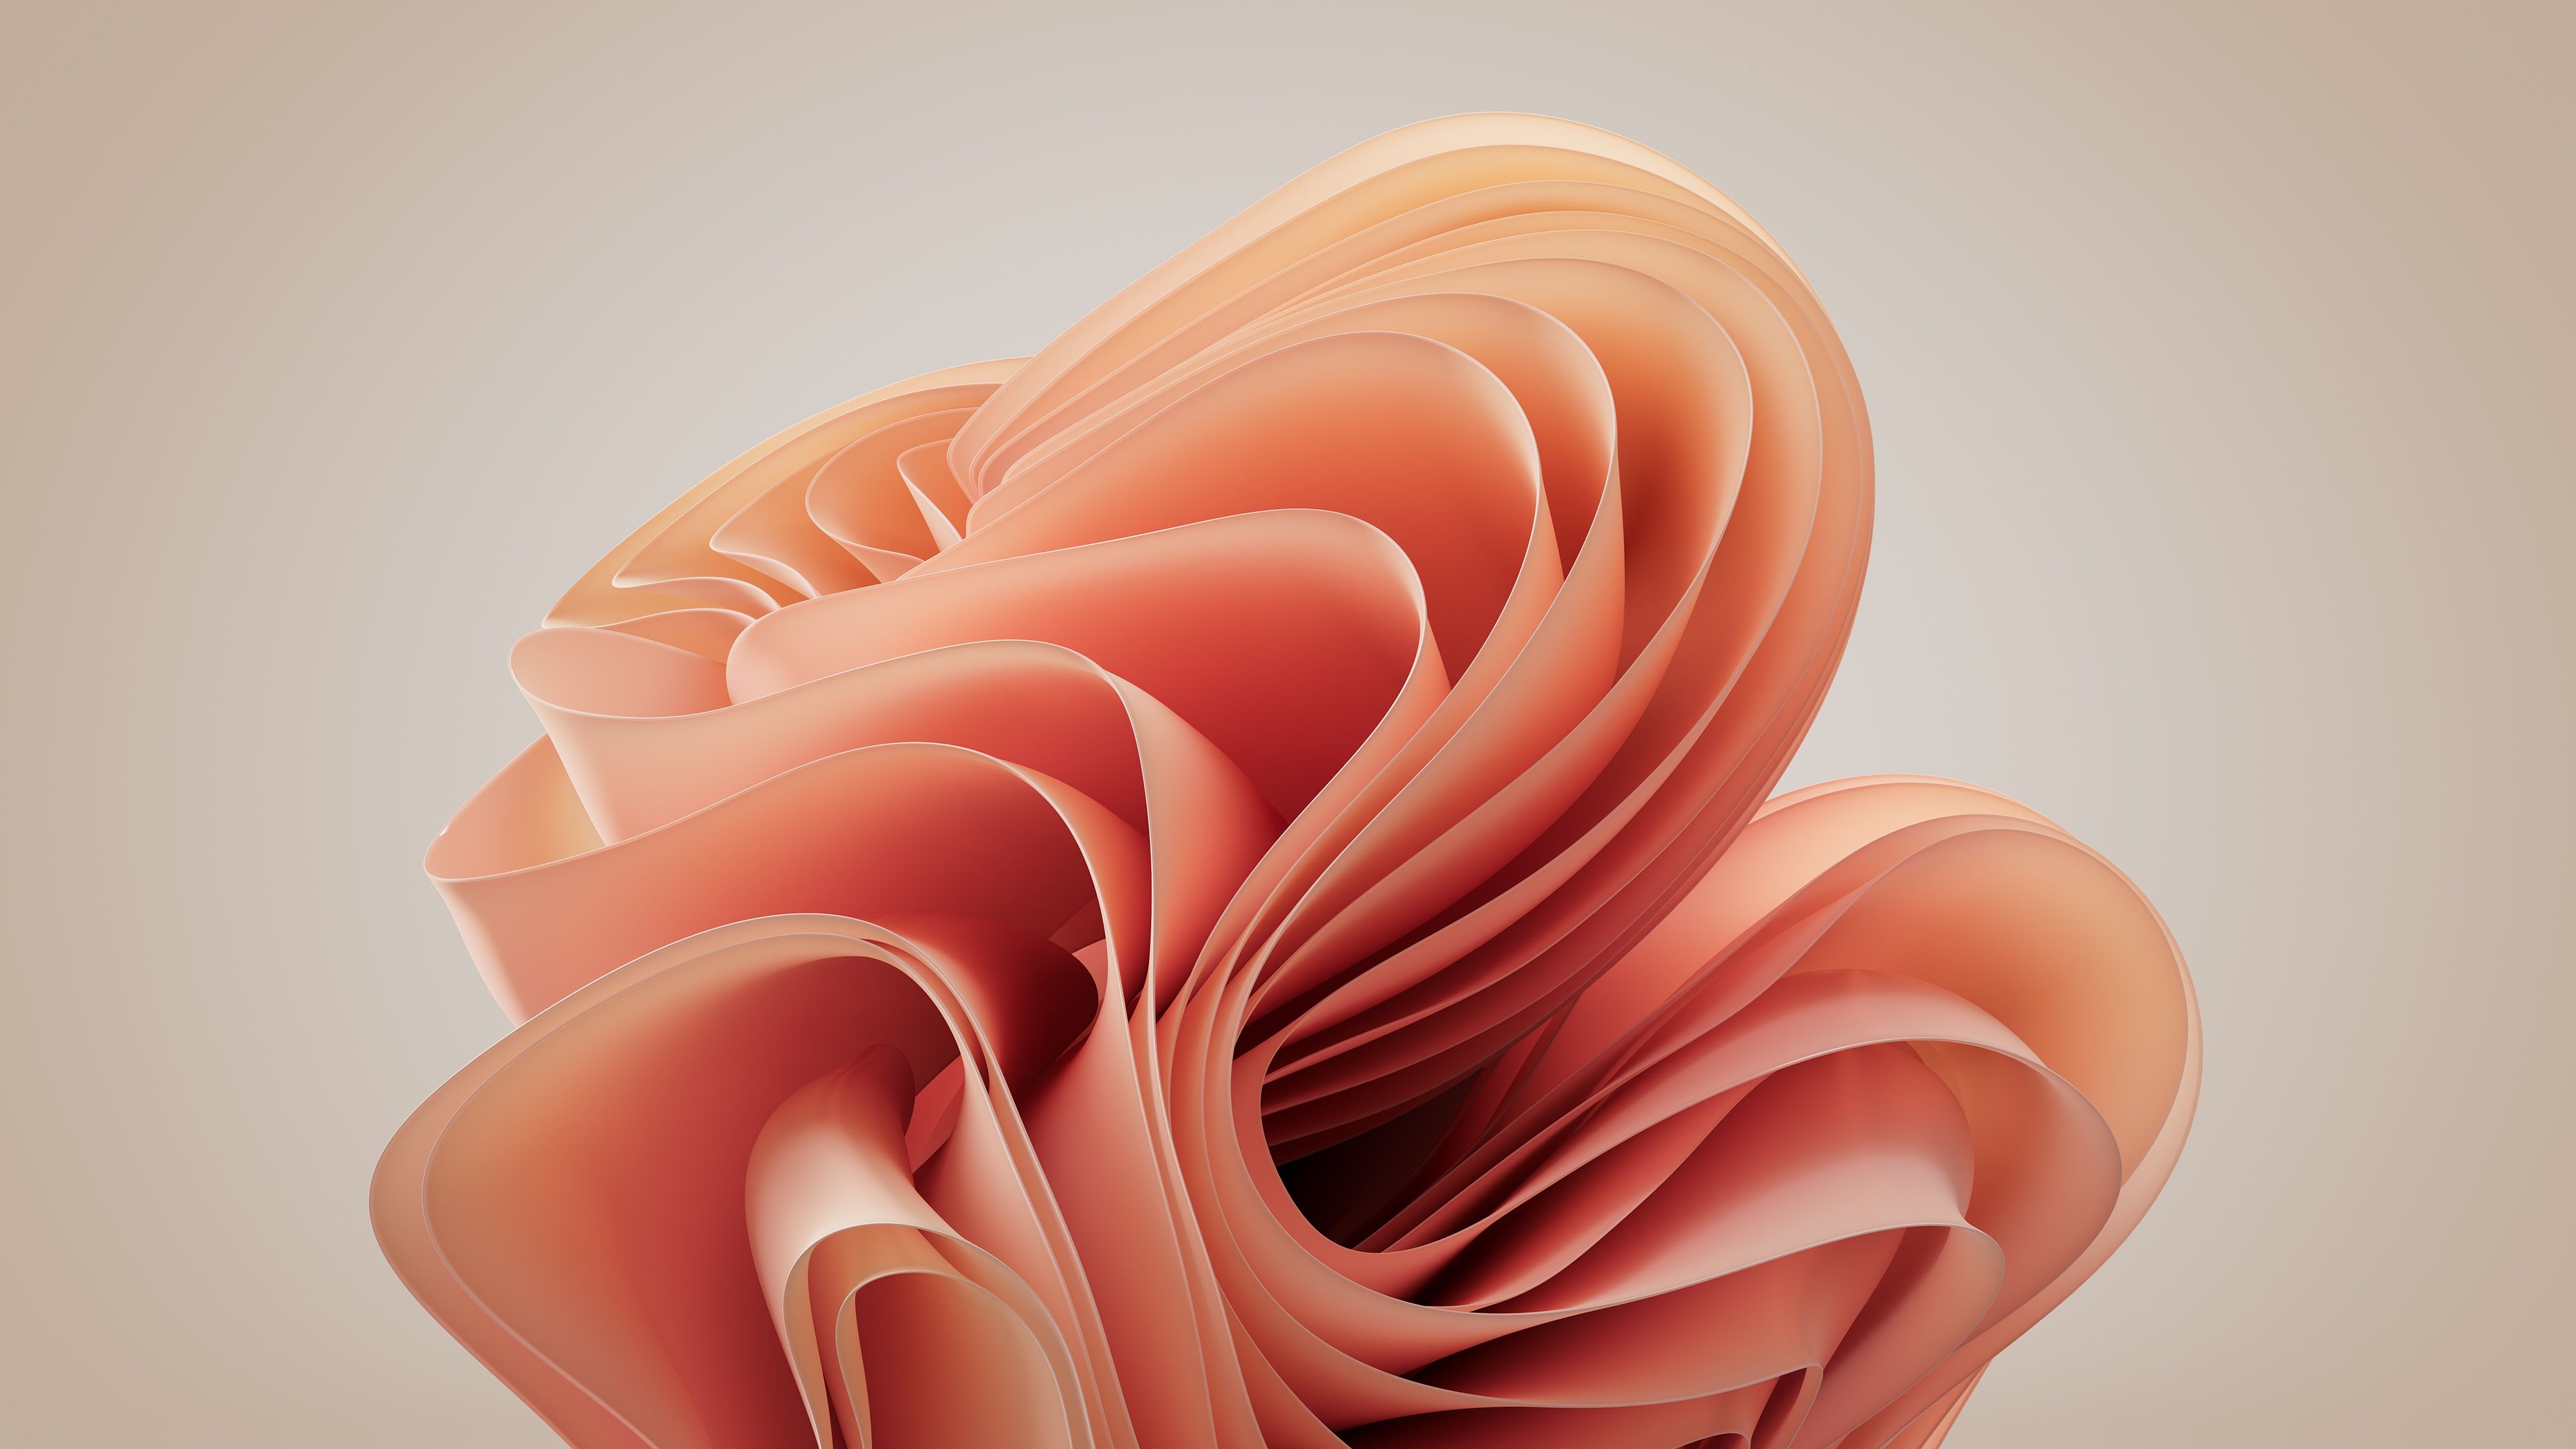 A 3D image of a sculpture made of curled paper. - Pastel orange